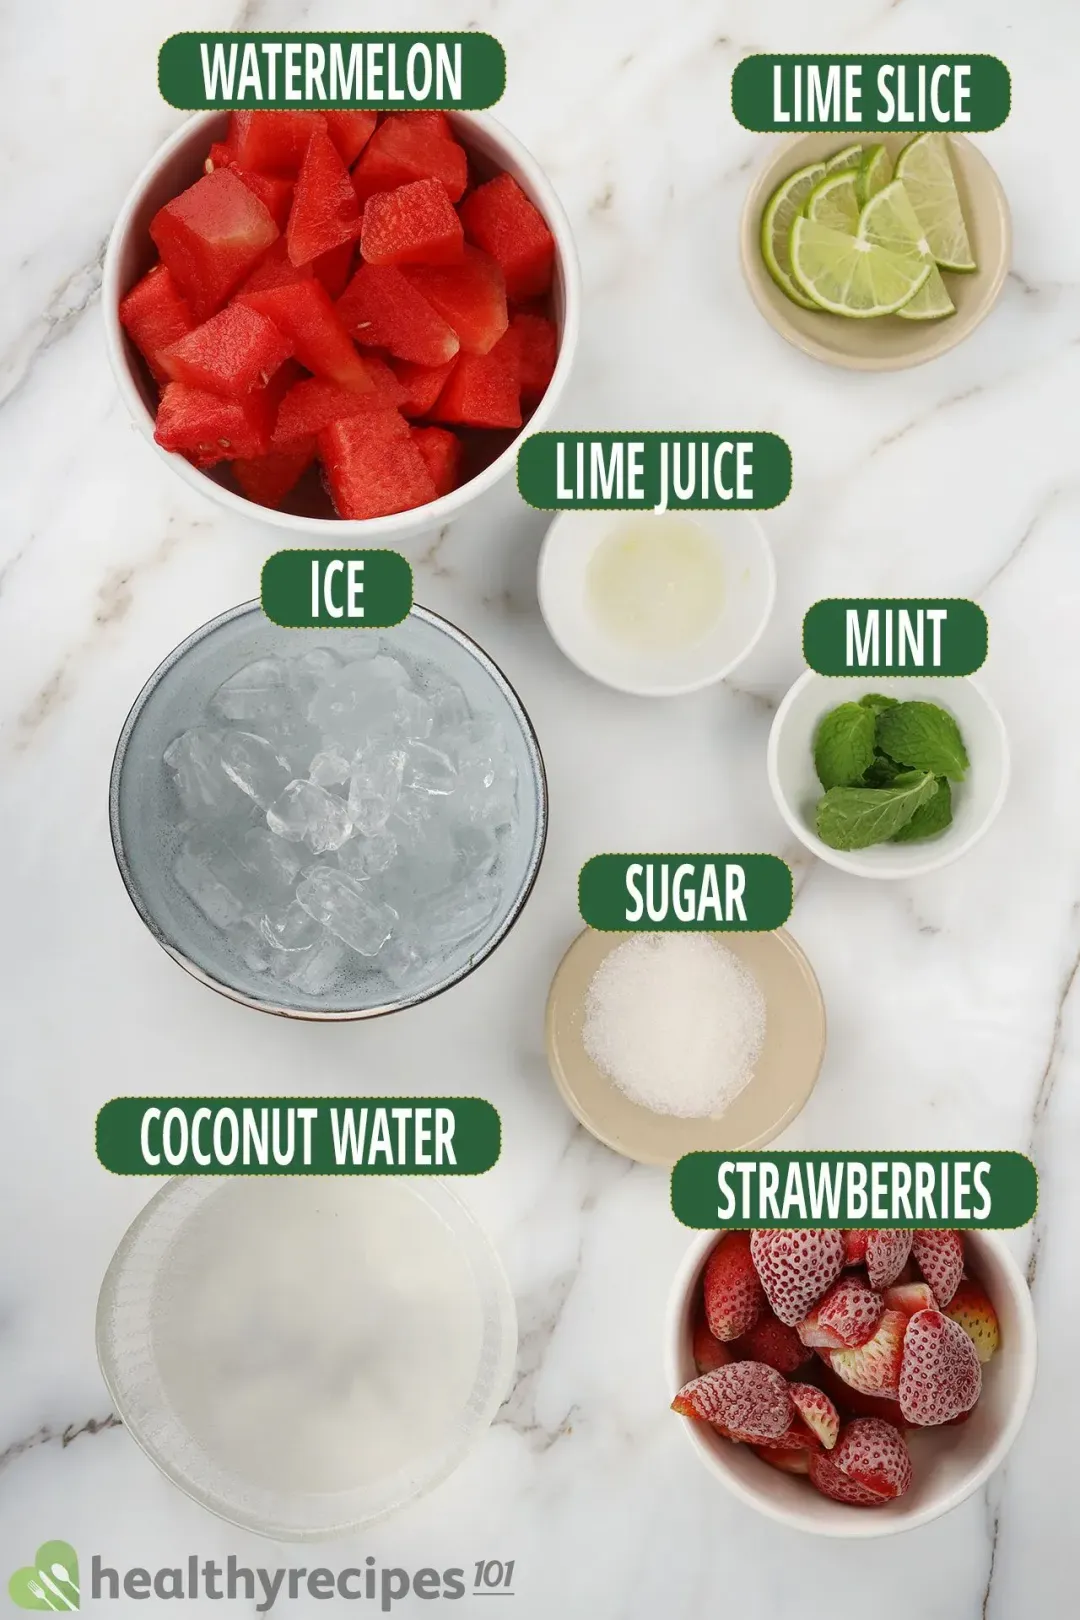 Ingredients for this watermelon mojito smoothie: cubed watermelon, lime slices, lime juice, frozen strawberries, coconut water, mint leaves, sugar, and ice